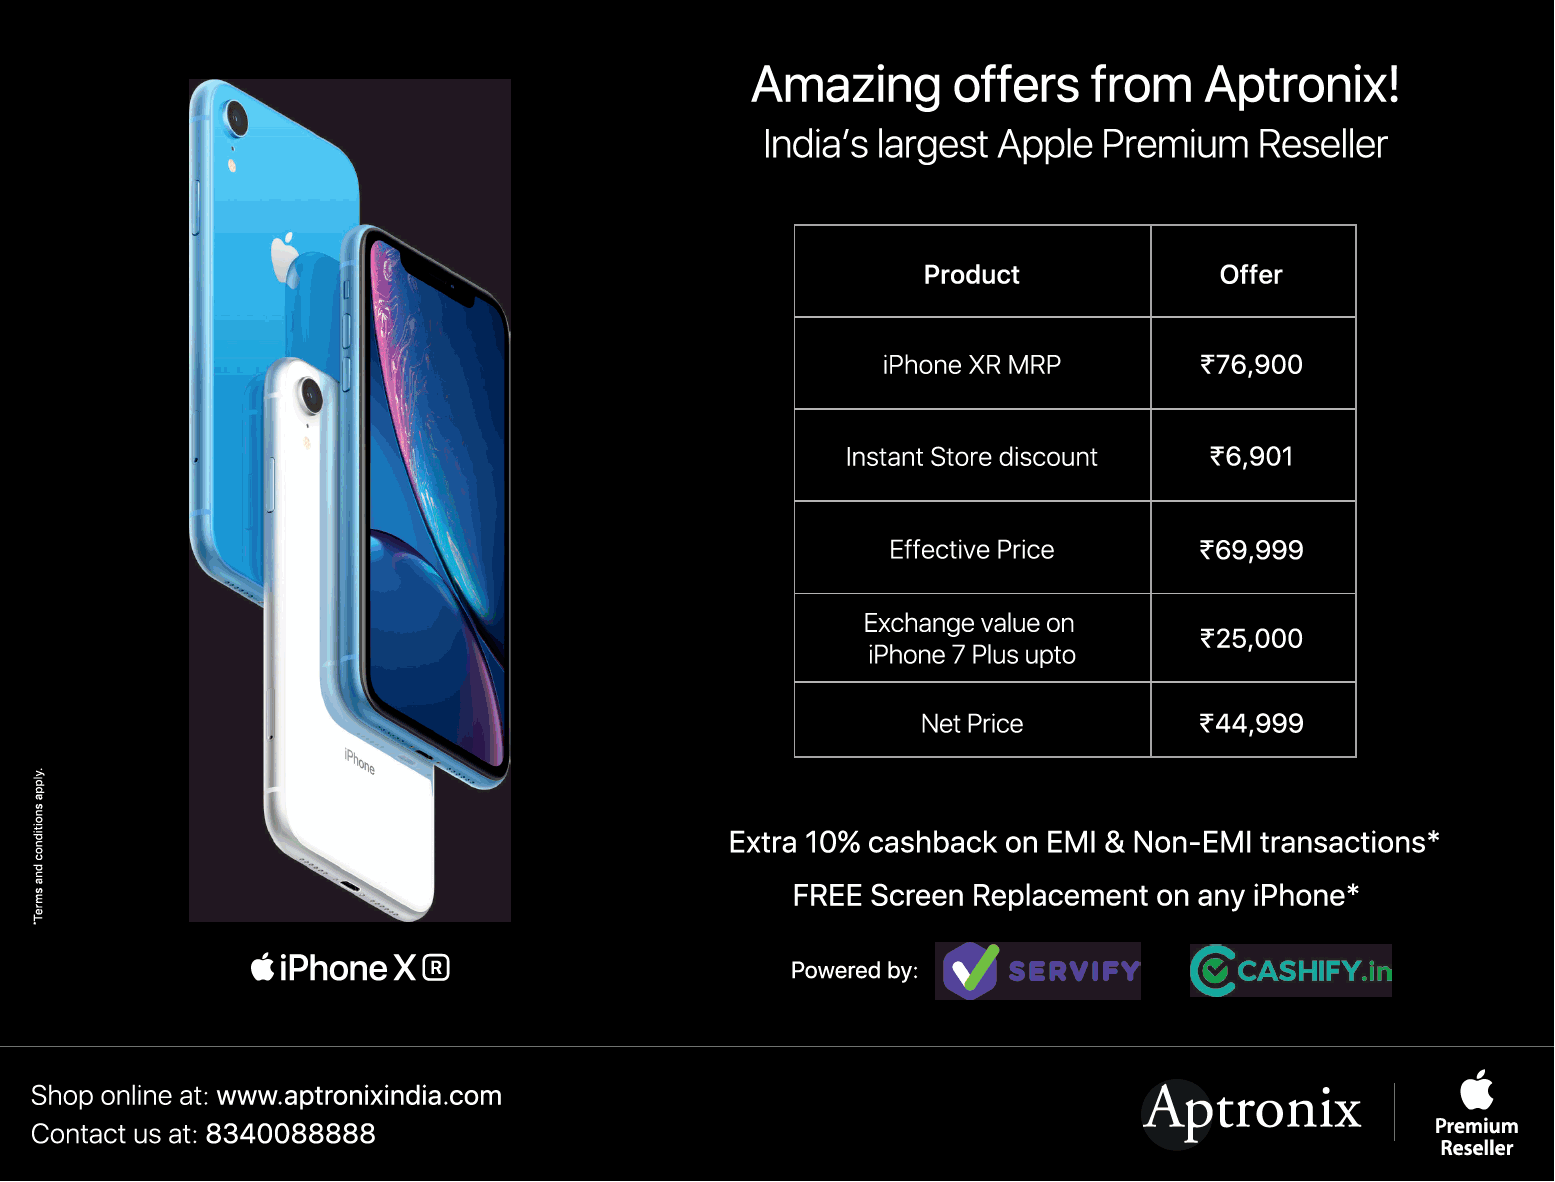 iphonex-amazing-offers-from-aptronix-ad-hyderabad-times-22-03-2019.png